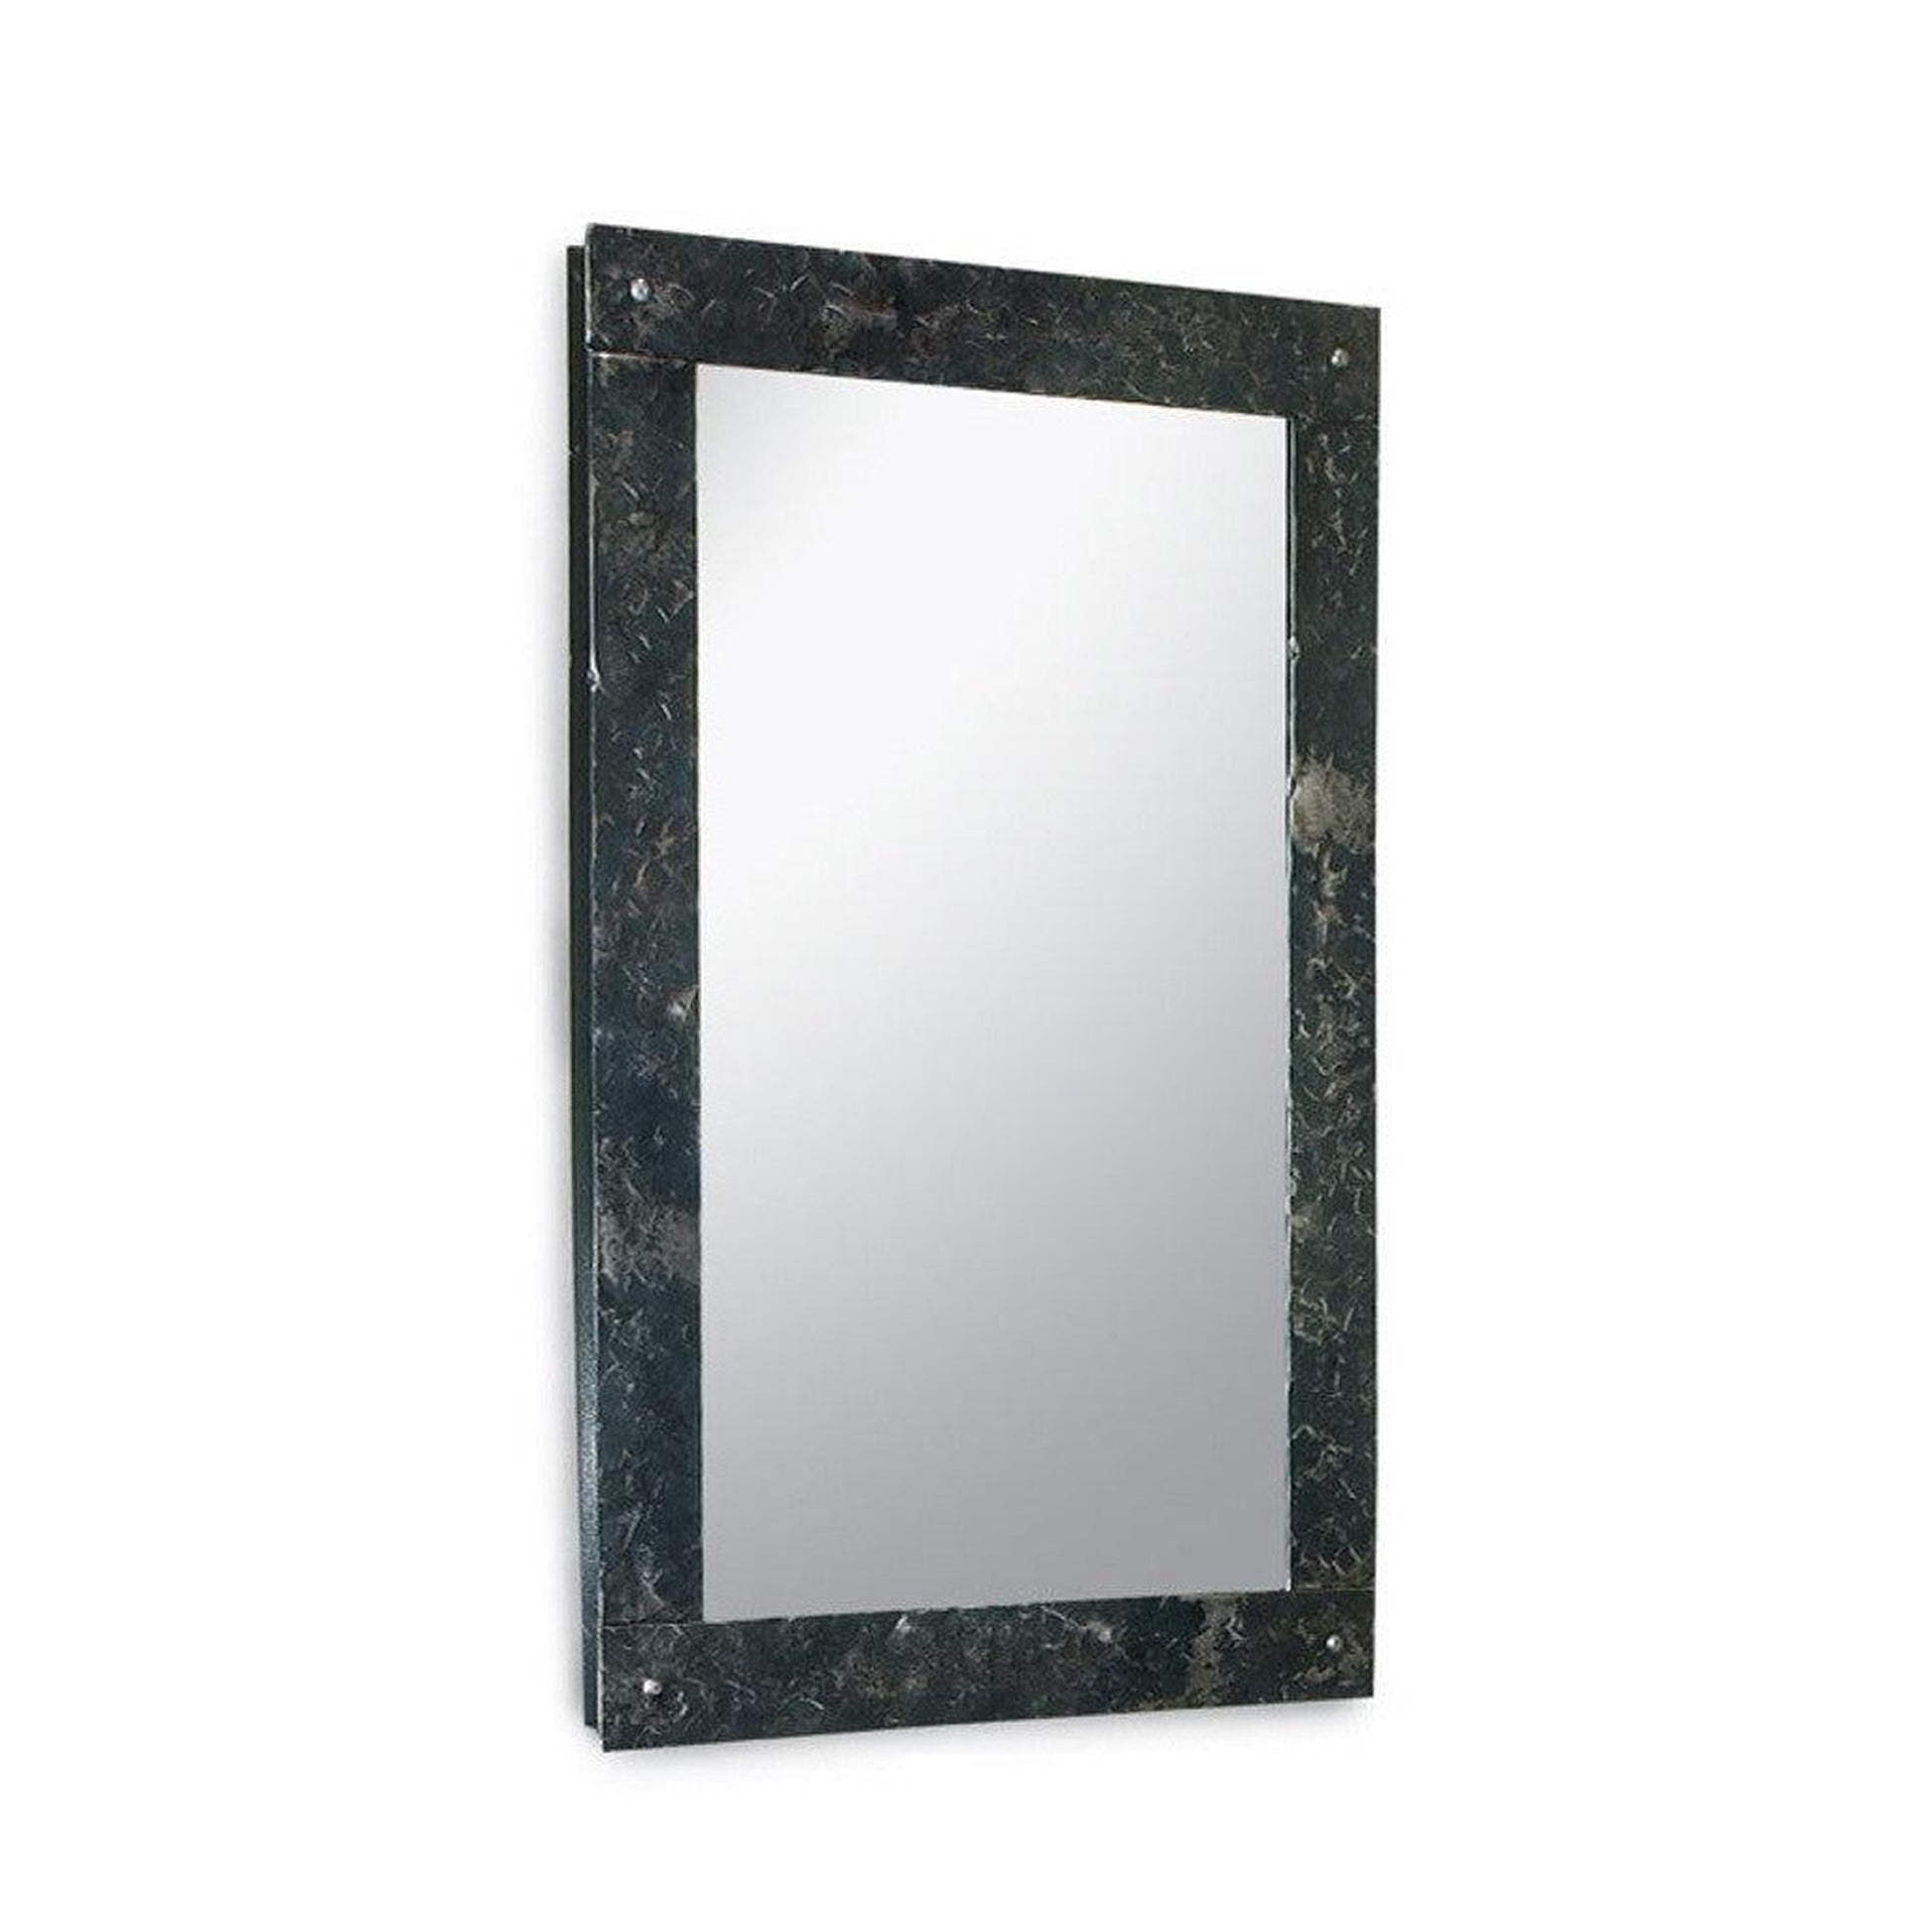 Stone County Ironworks Studio Series 29" x 41" Large Hand Rubbed Bronze Iron Wall Mirror With Pewter Iron Accent